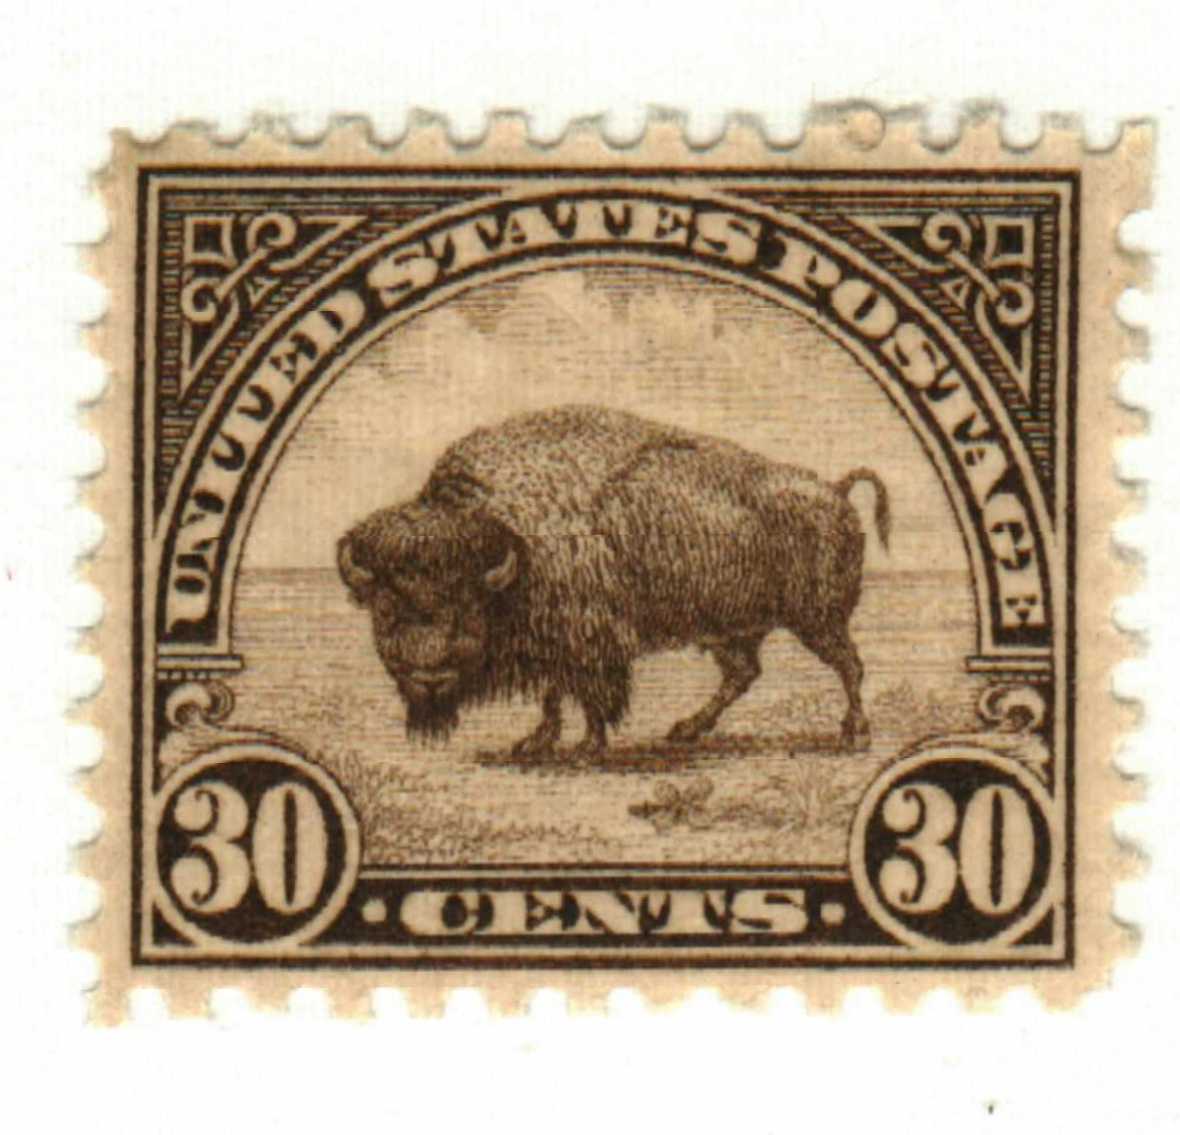 10 Buffalo Stamps Vintage Unused Bison Postage Stamps for Mailing –  Edelweiss Post